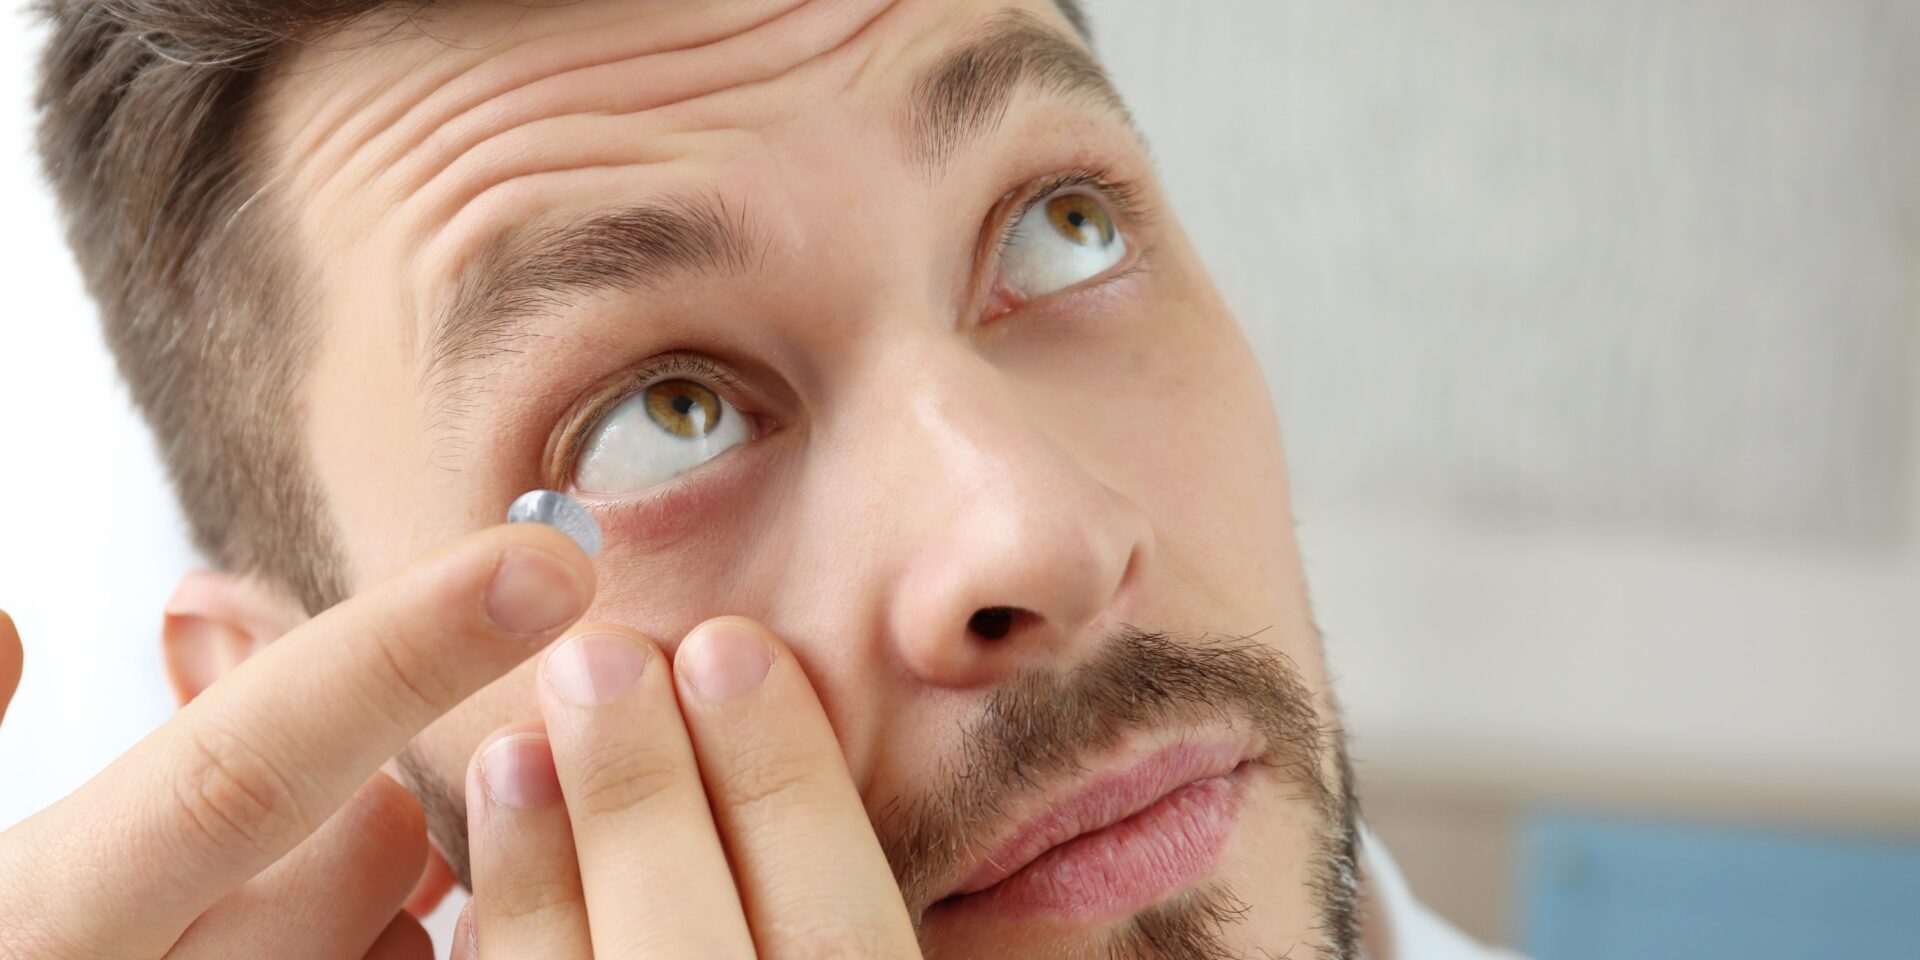 Caring for Your Contact Lenses